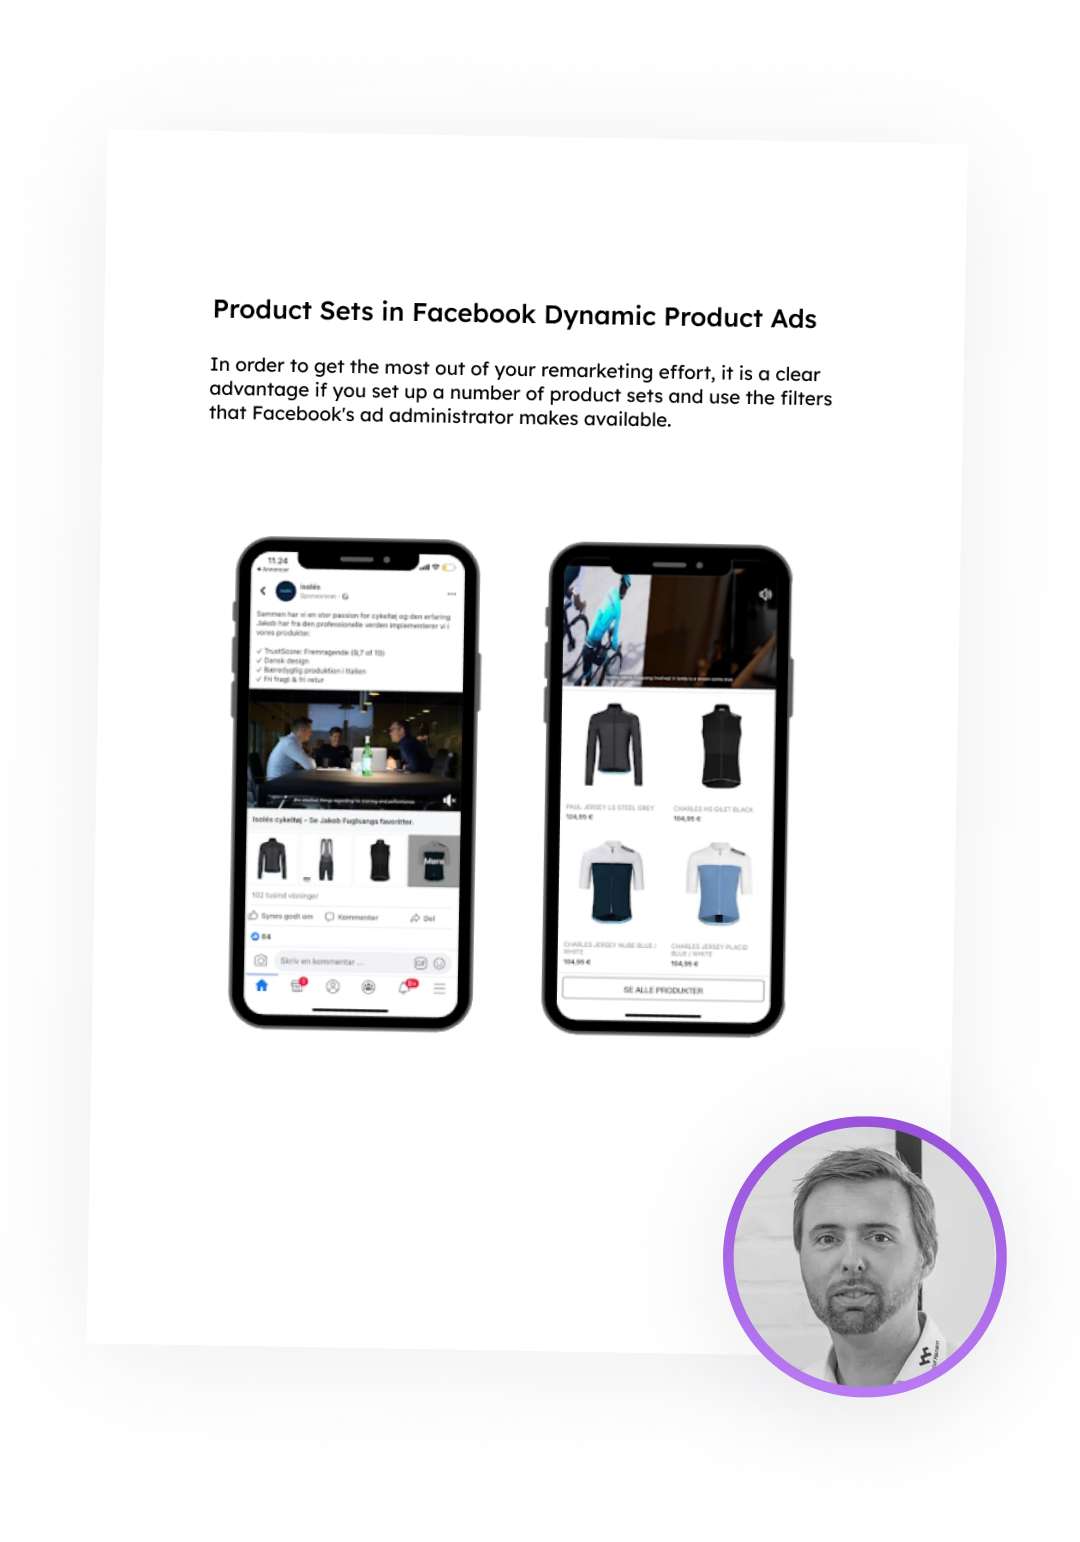 Dynamic product ads with product sets